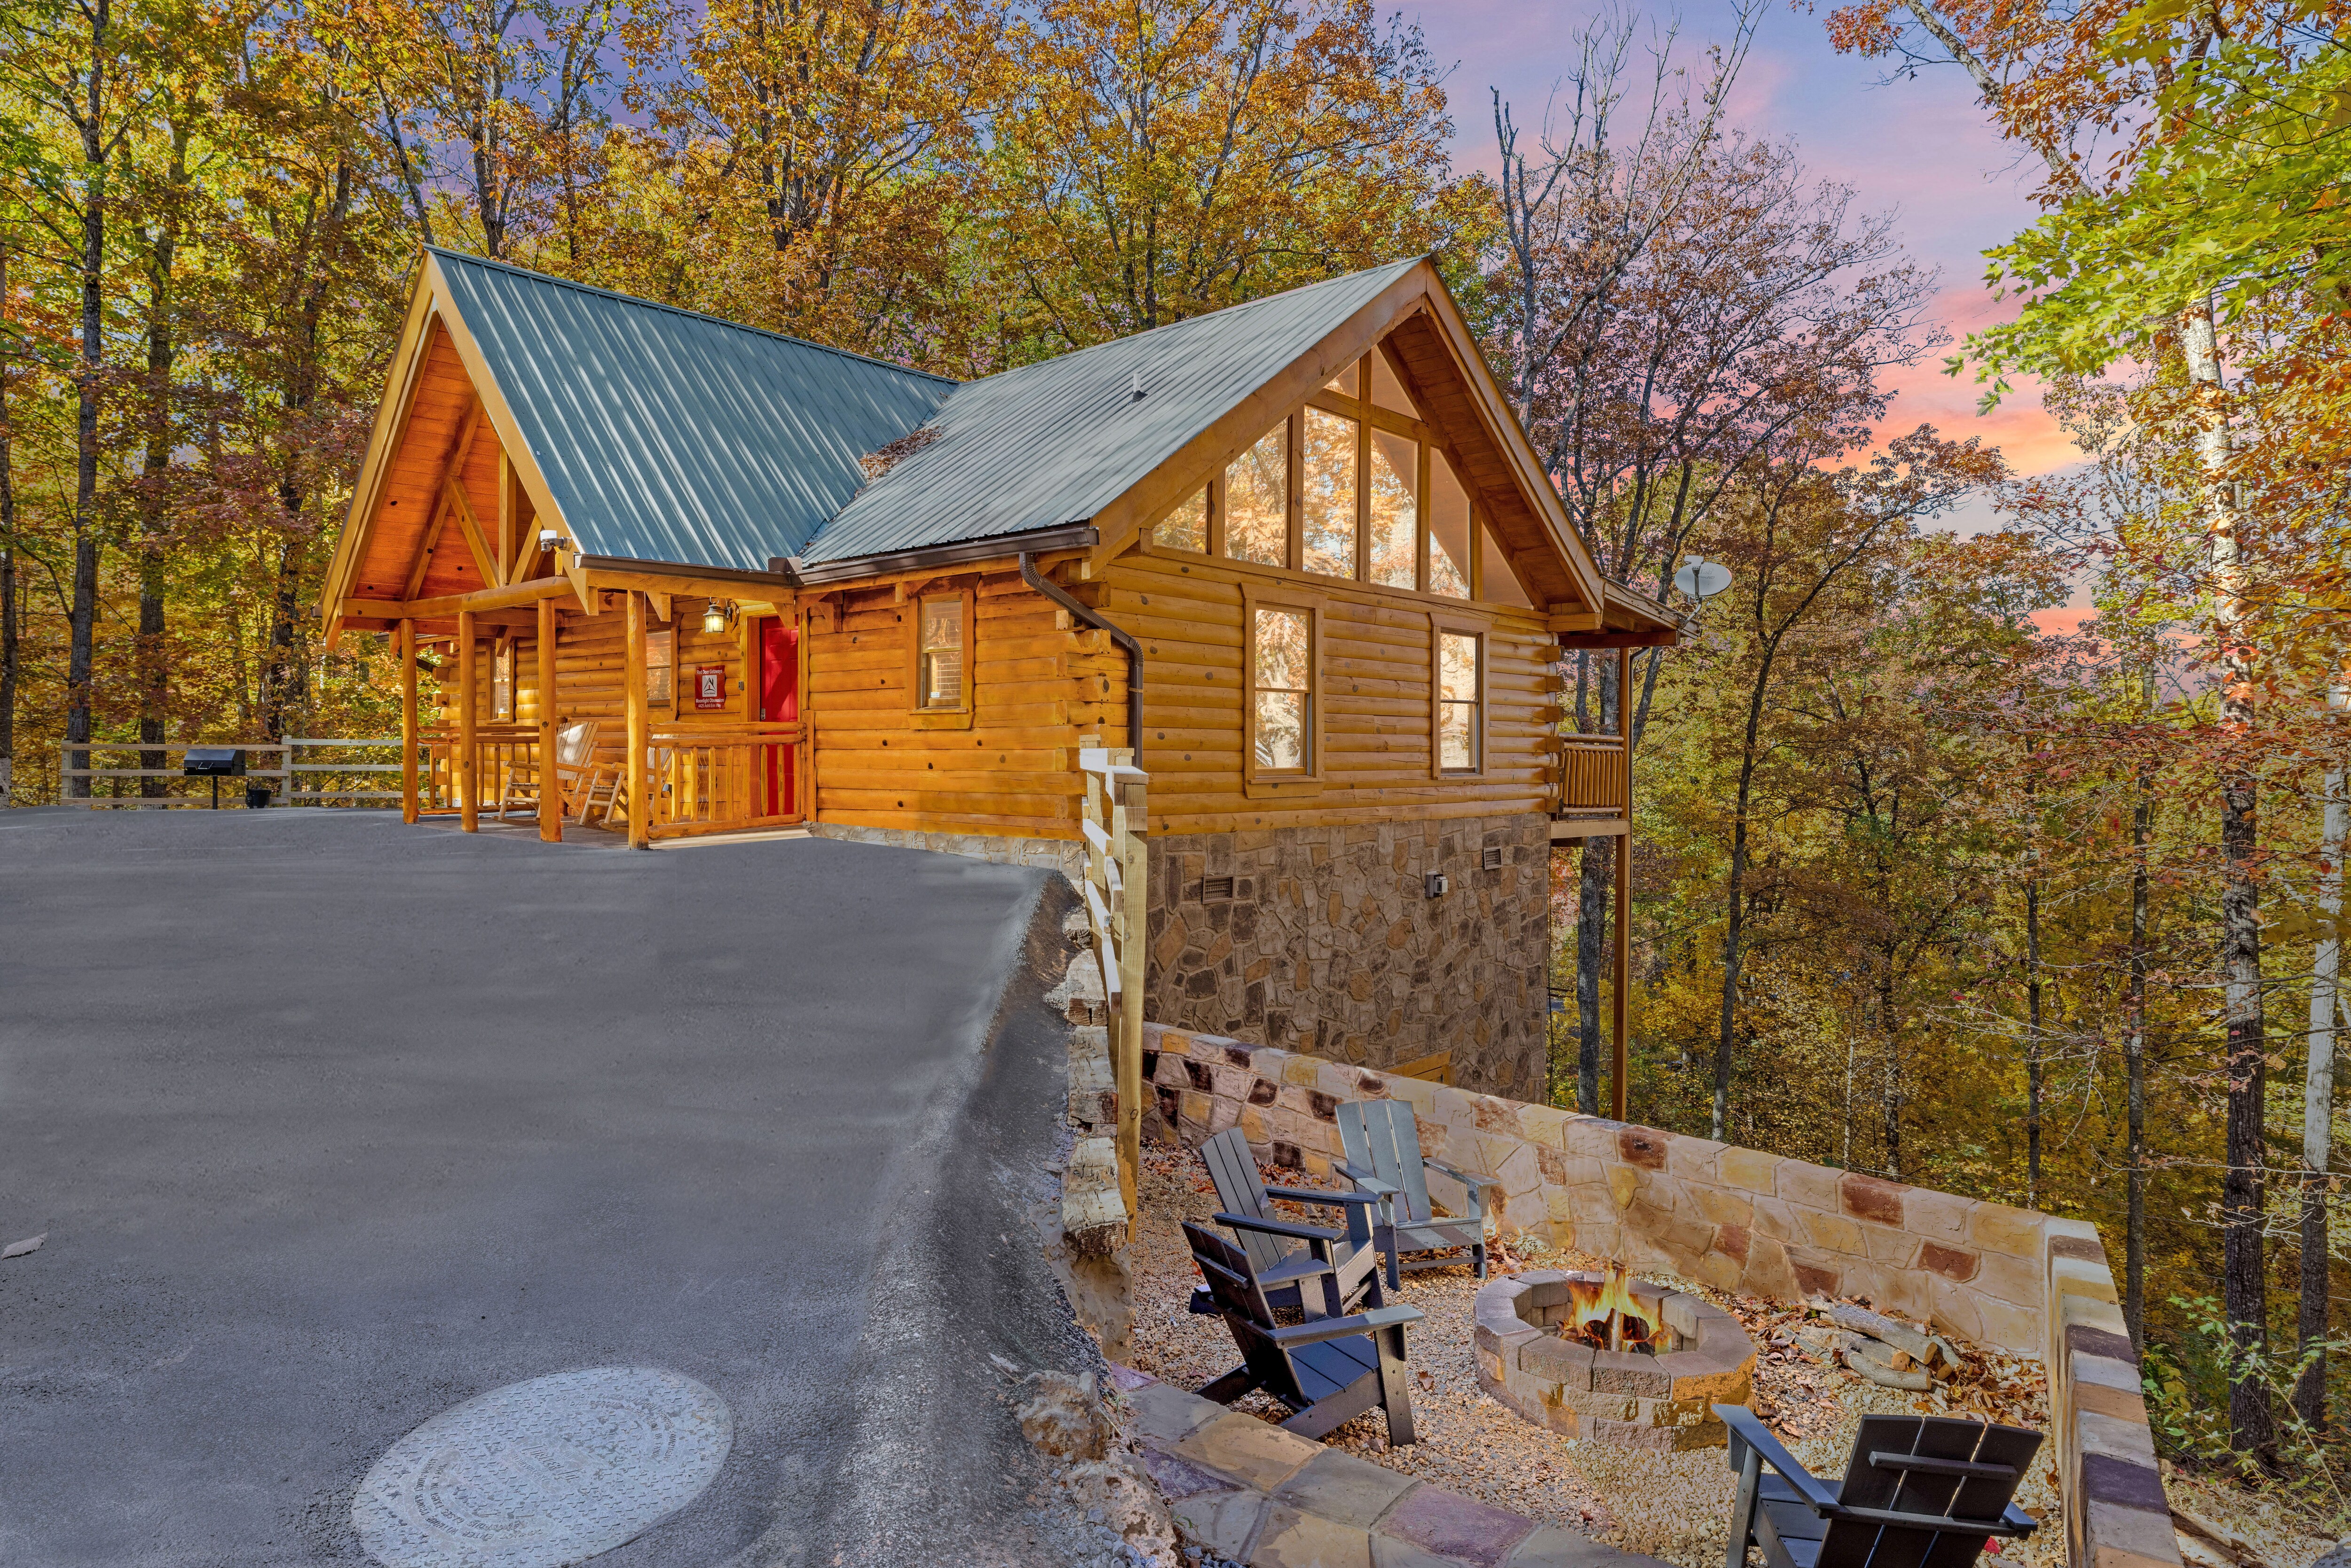 Property Image 1 - Moonlight Obsession, a Dog-Friendly 2 BD/2 Bath Log Cabin located 5 miles from downtown Gatlinburg